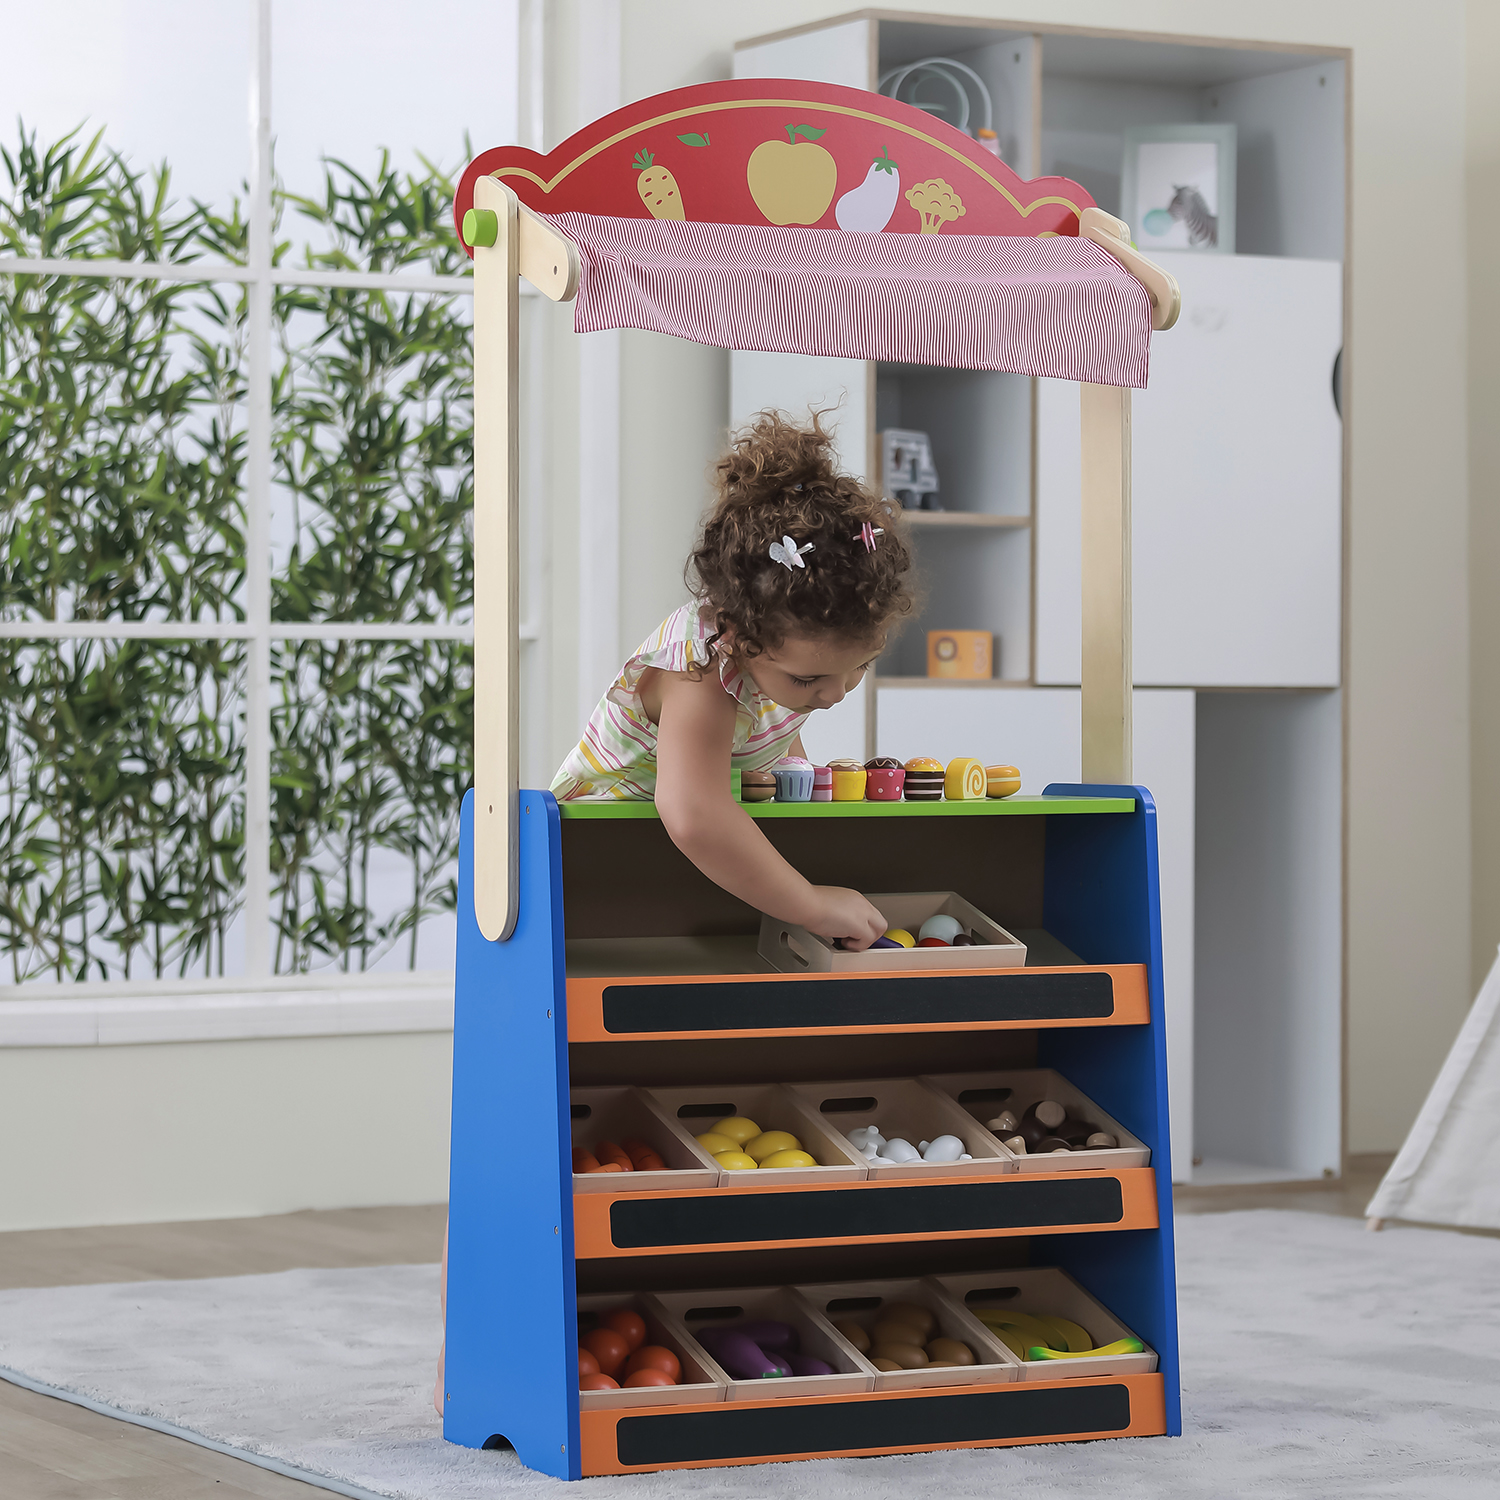 Girl playing in the grocery stand which can be converted into a theatre too